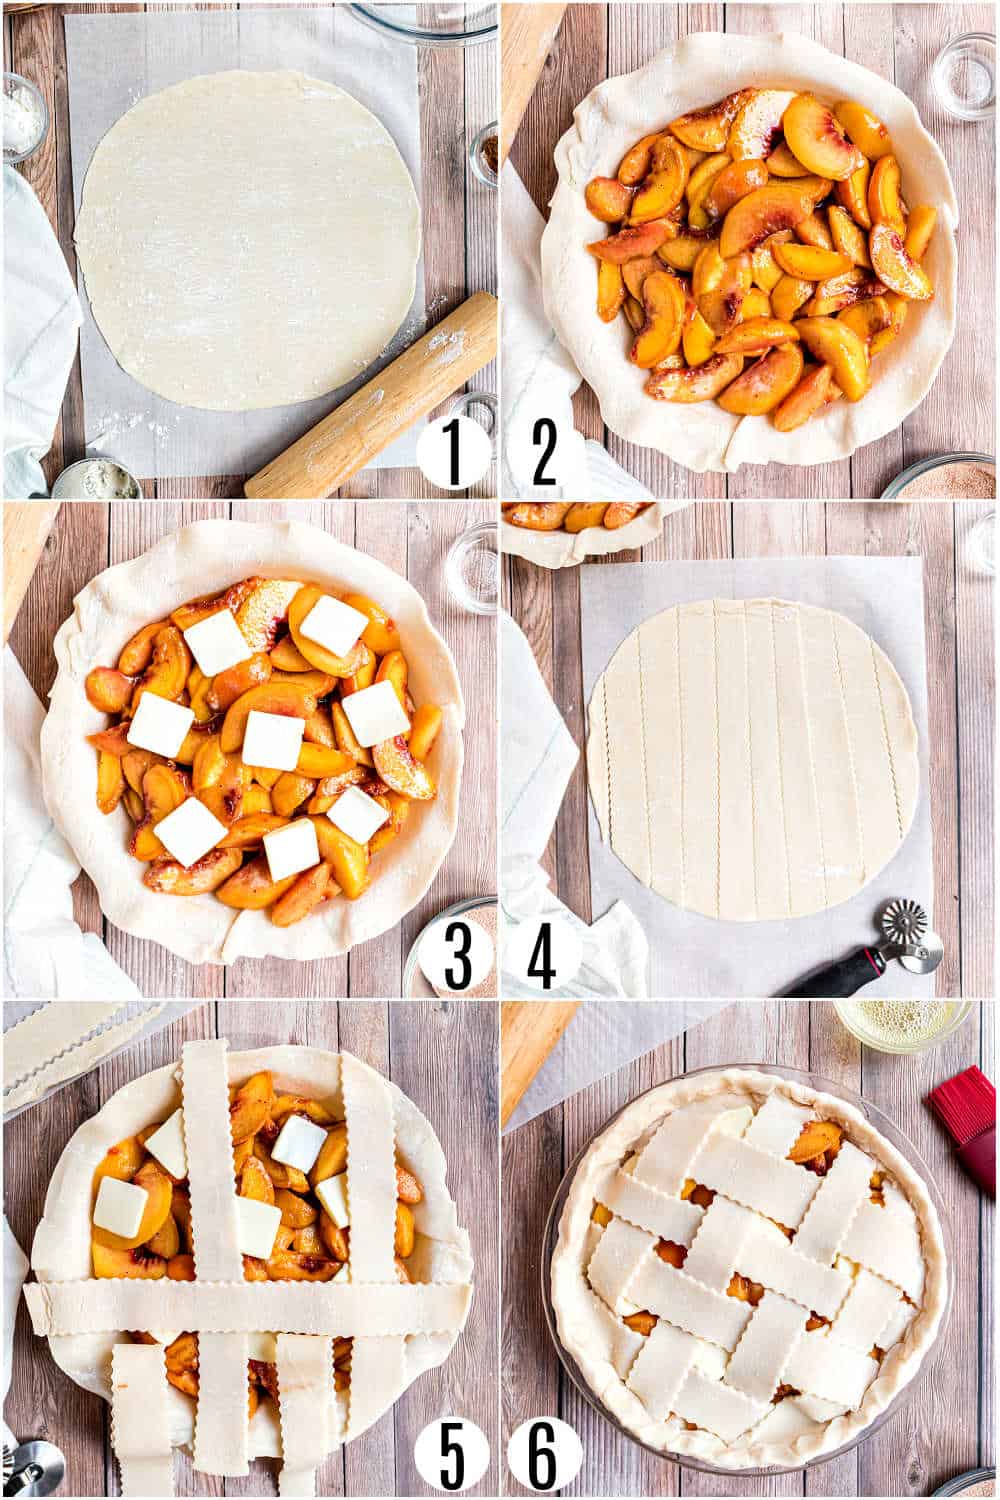 Step by step photos showing how to make peach pie with a lattice pie crust.